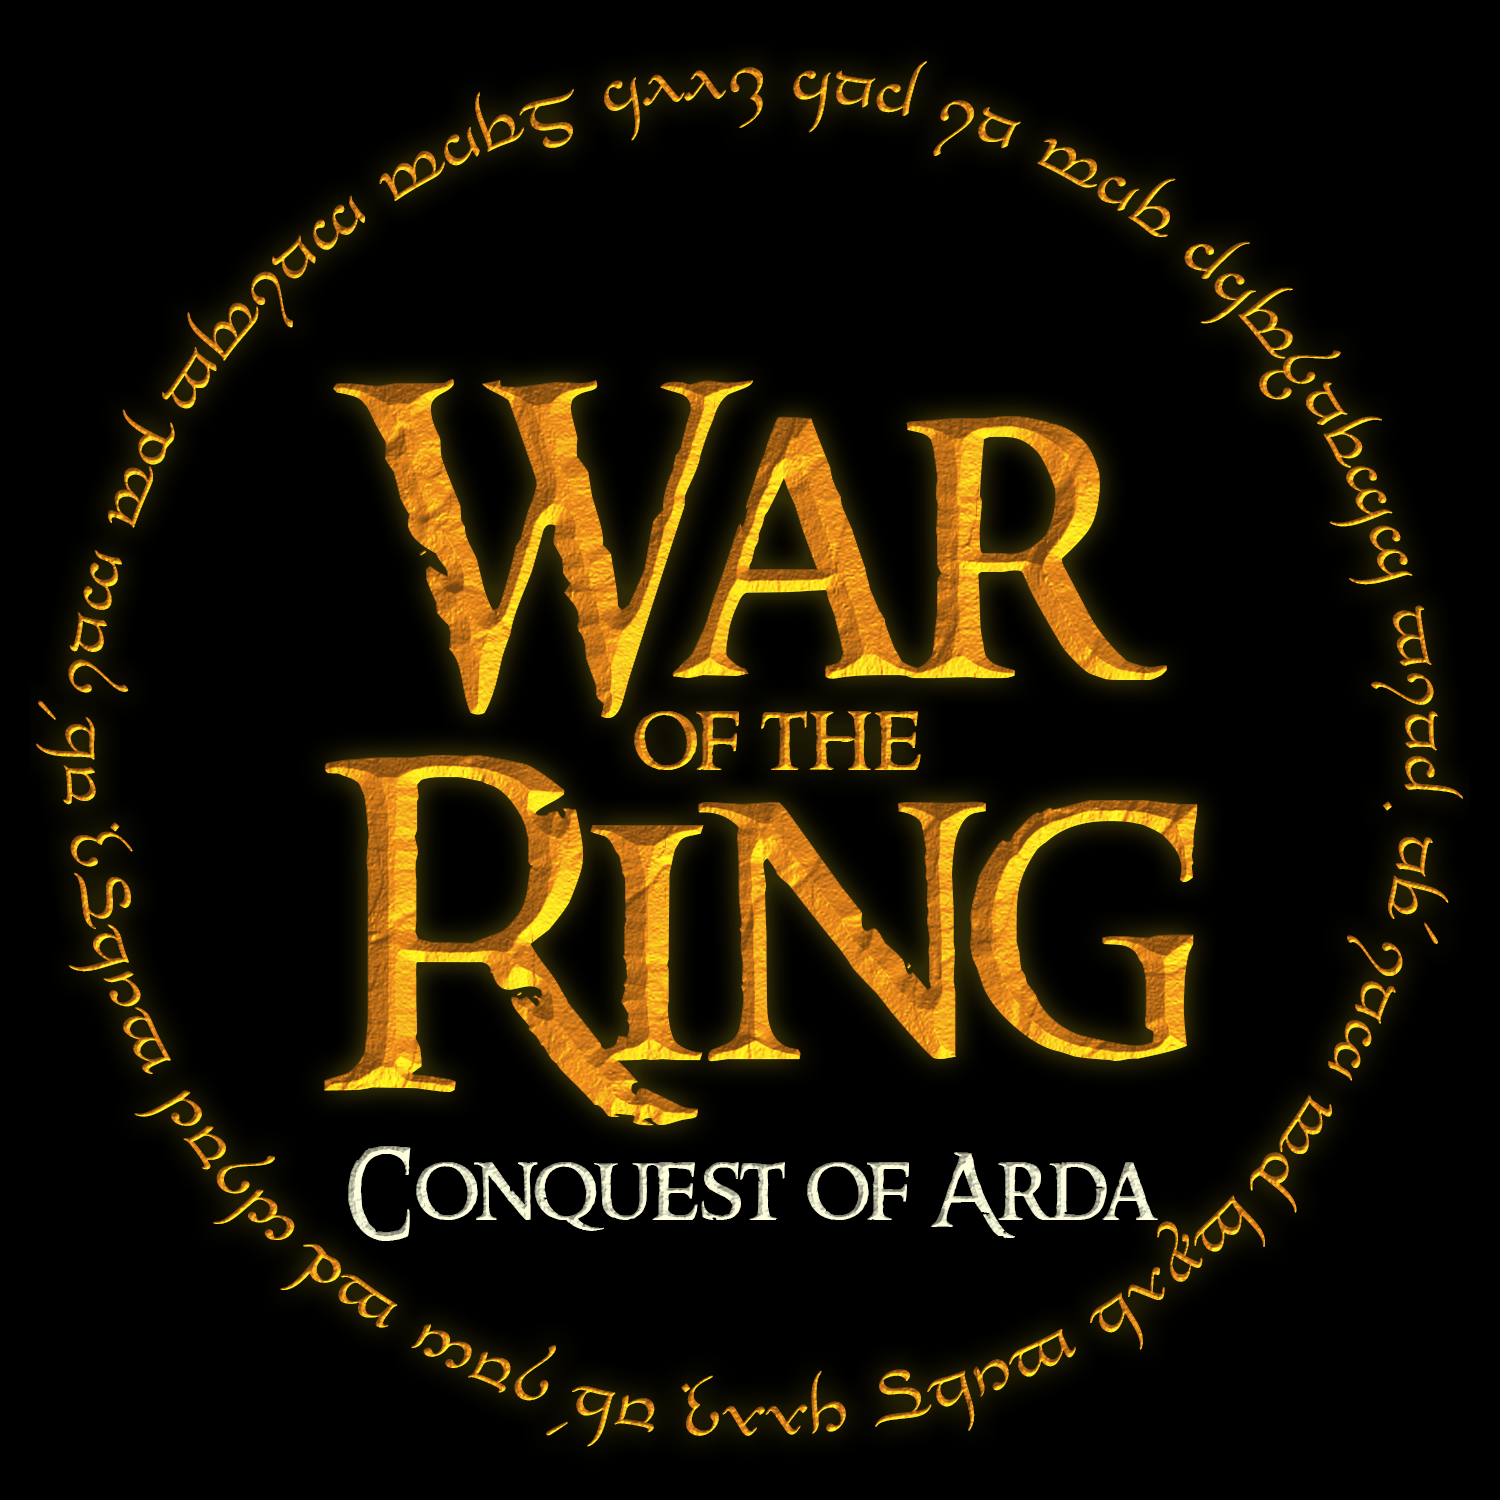 Ring Portal, The Lord of the Rings Minecraft Mod Wiki